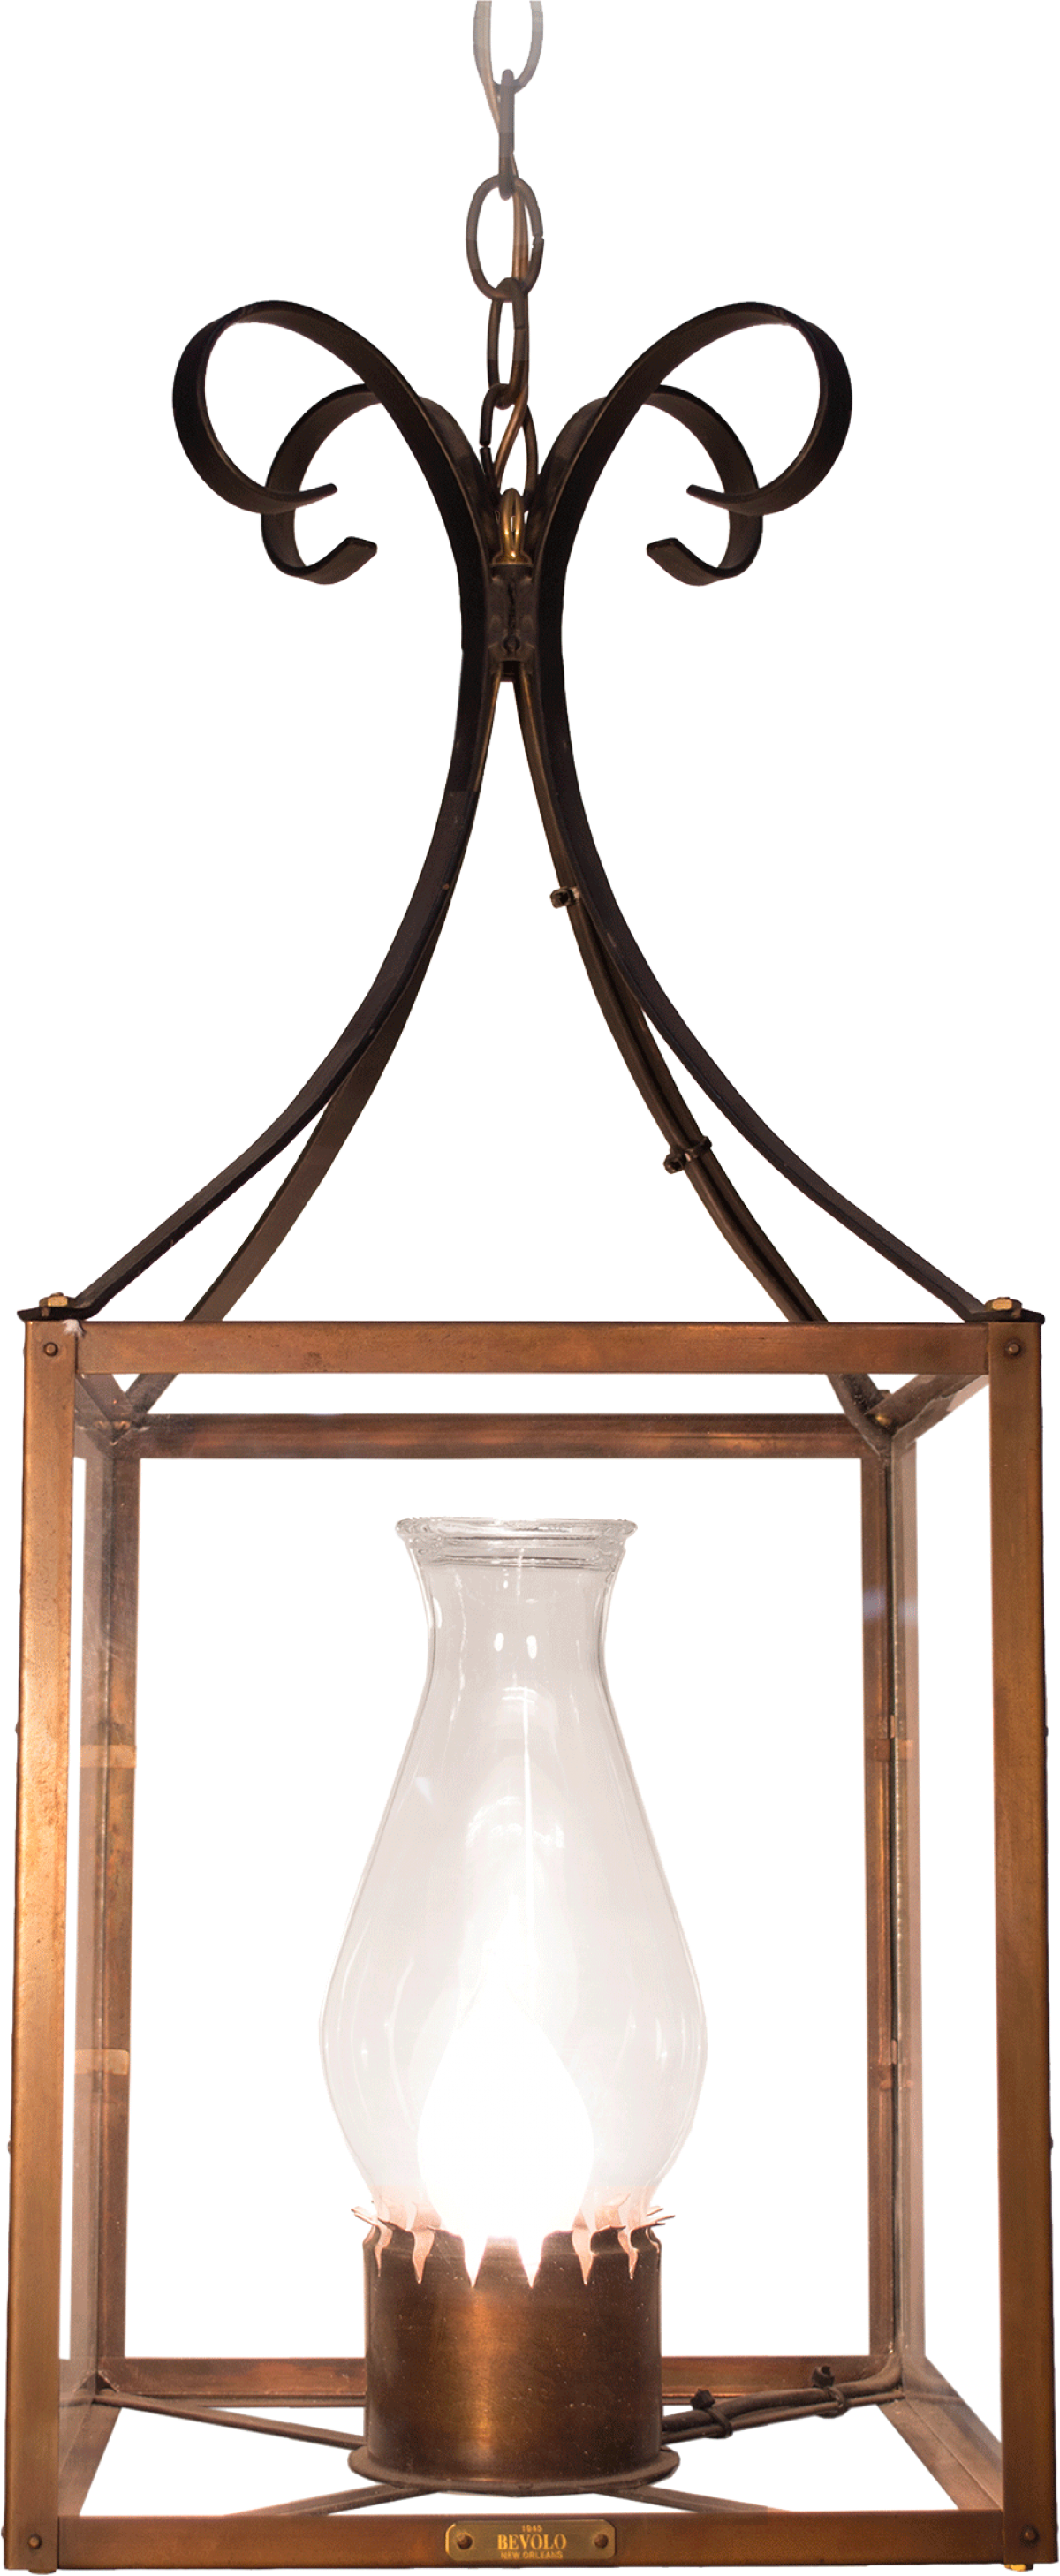 Square Hanging Light Copper Lights Bevolo Gas Electric - Square Hanging Light Copper Lights Bevolo Gas Electric (1200x2916)